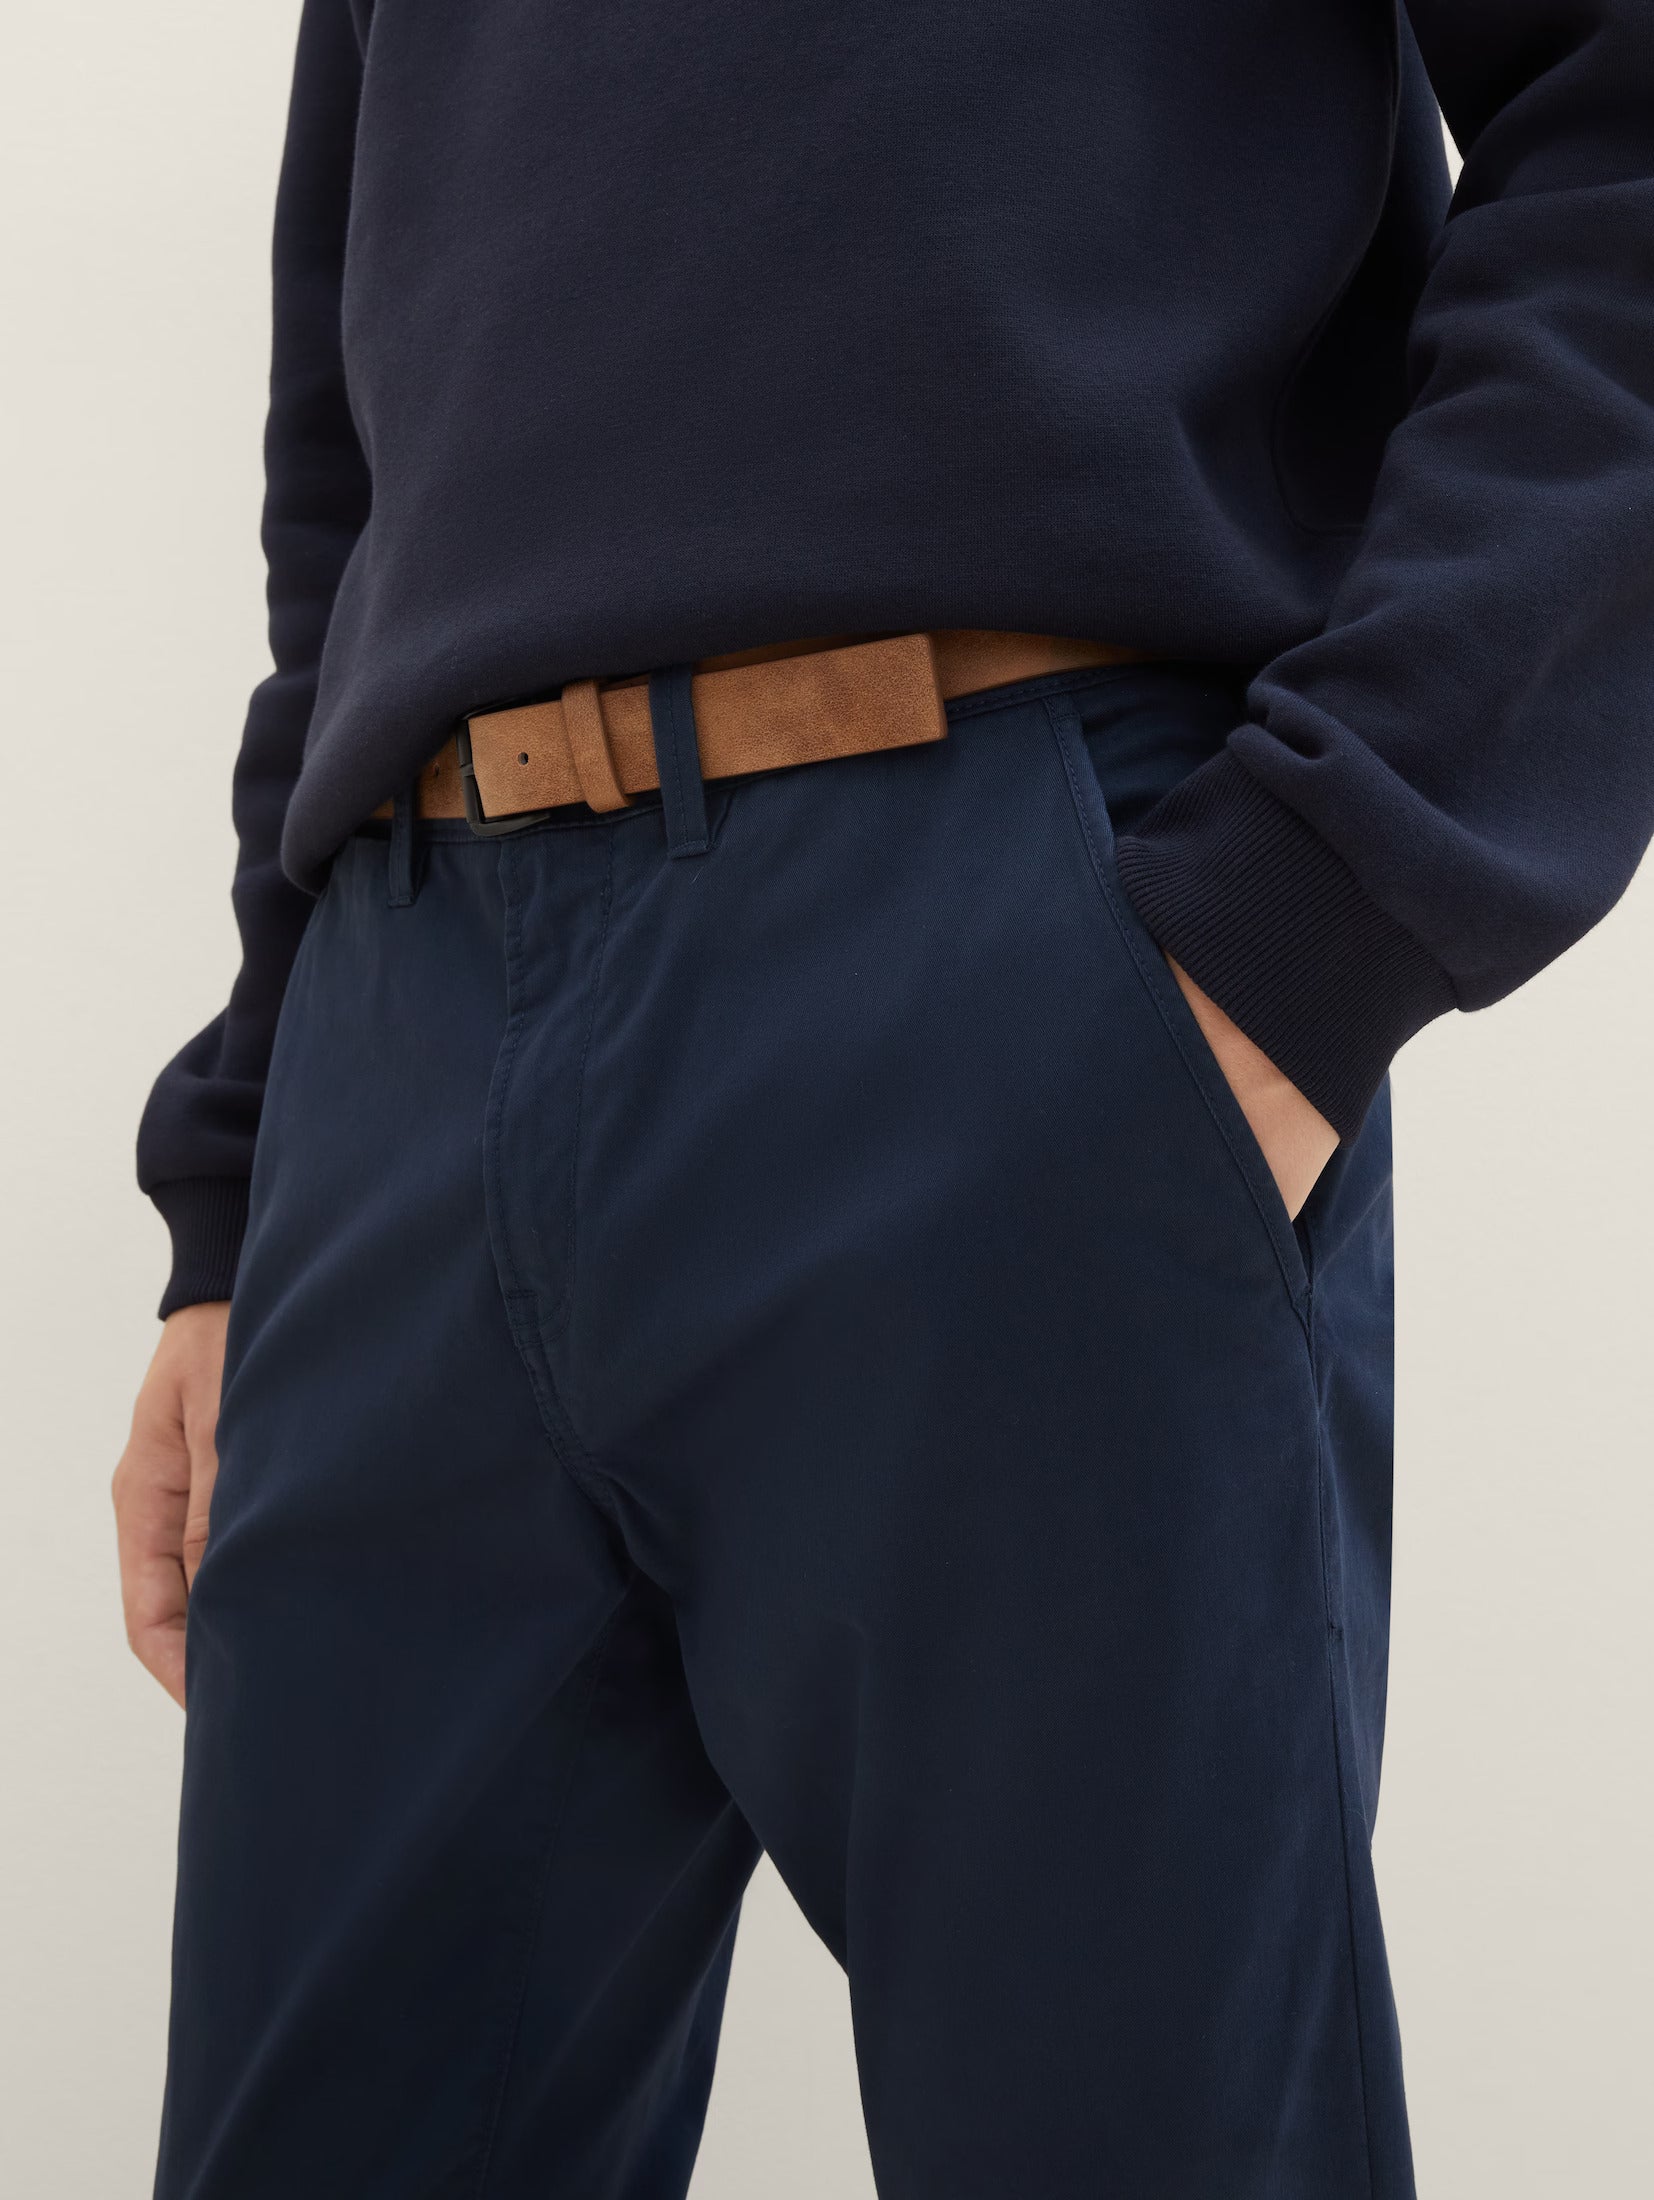 Tom Tailor Navy Chino With A Belt